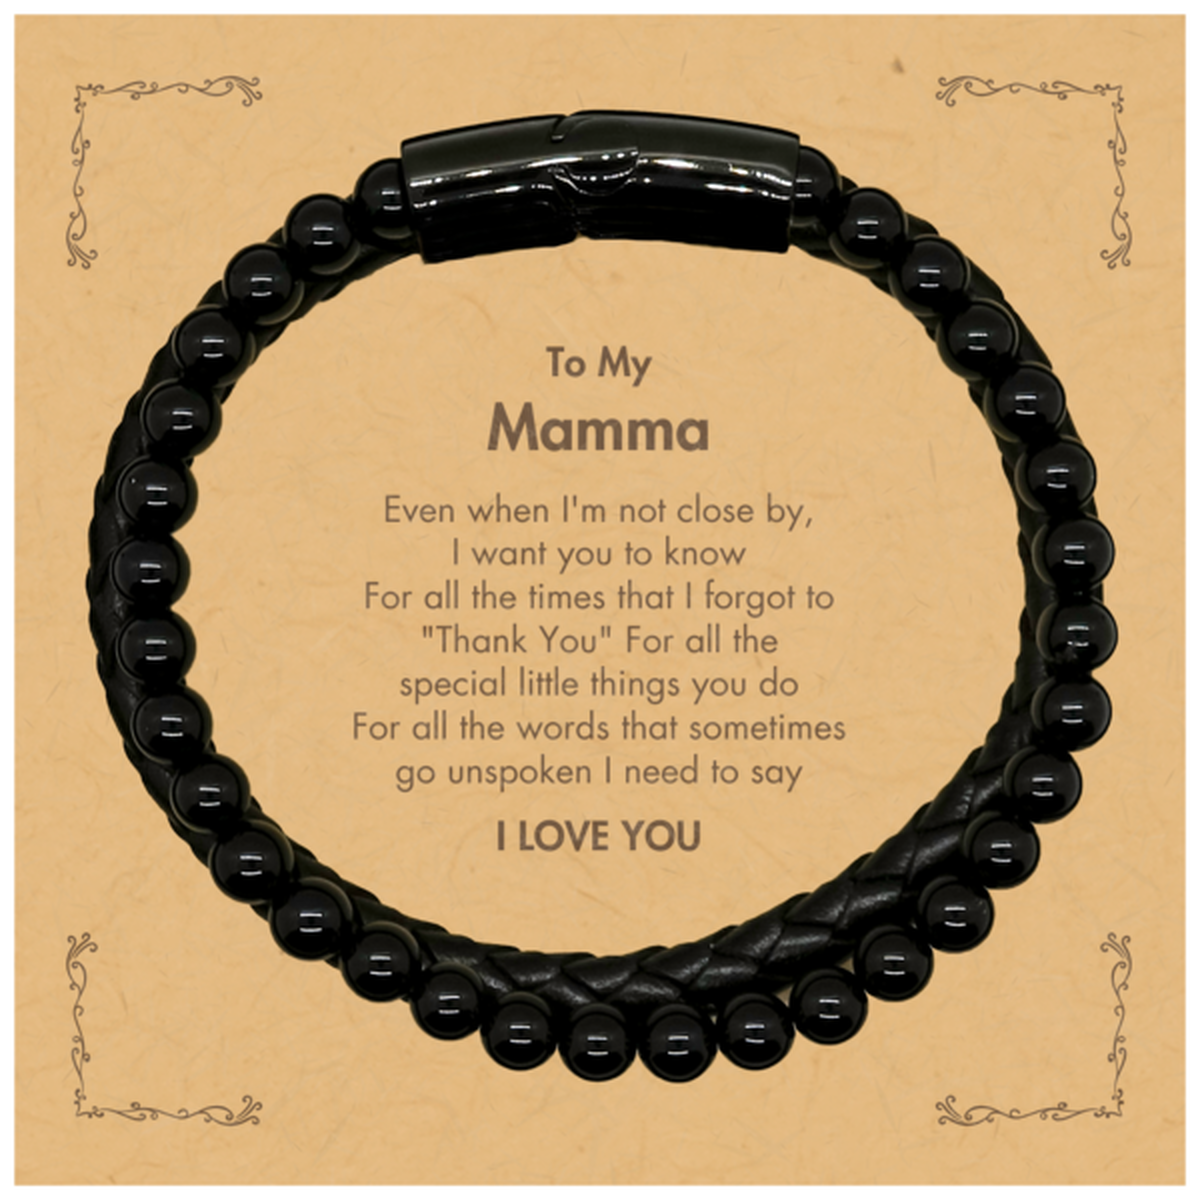 Thank You Gifts for Mamma, Keepsake Stone Leather Bracelets Gifts for Mamma Birthday Mother's day Father's Day Mamma For all the words That sometimes go unspoken I need to say I LOVE YOU